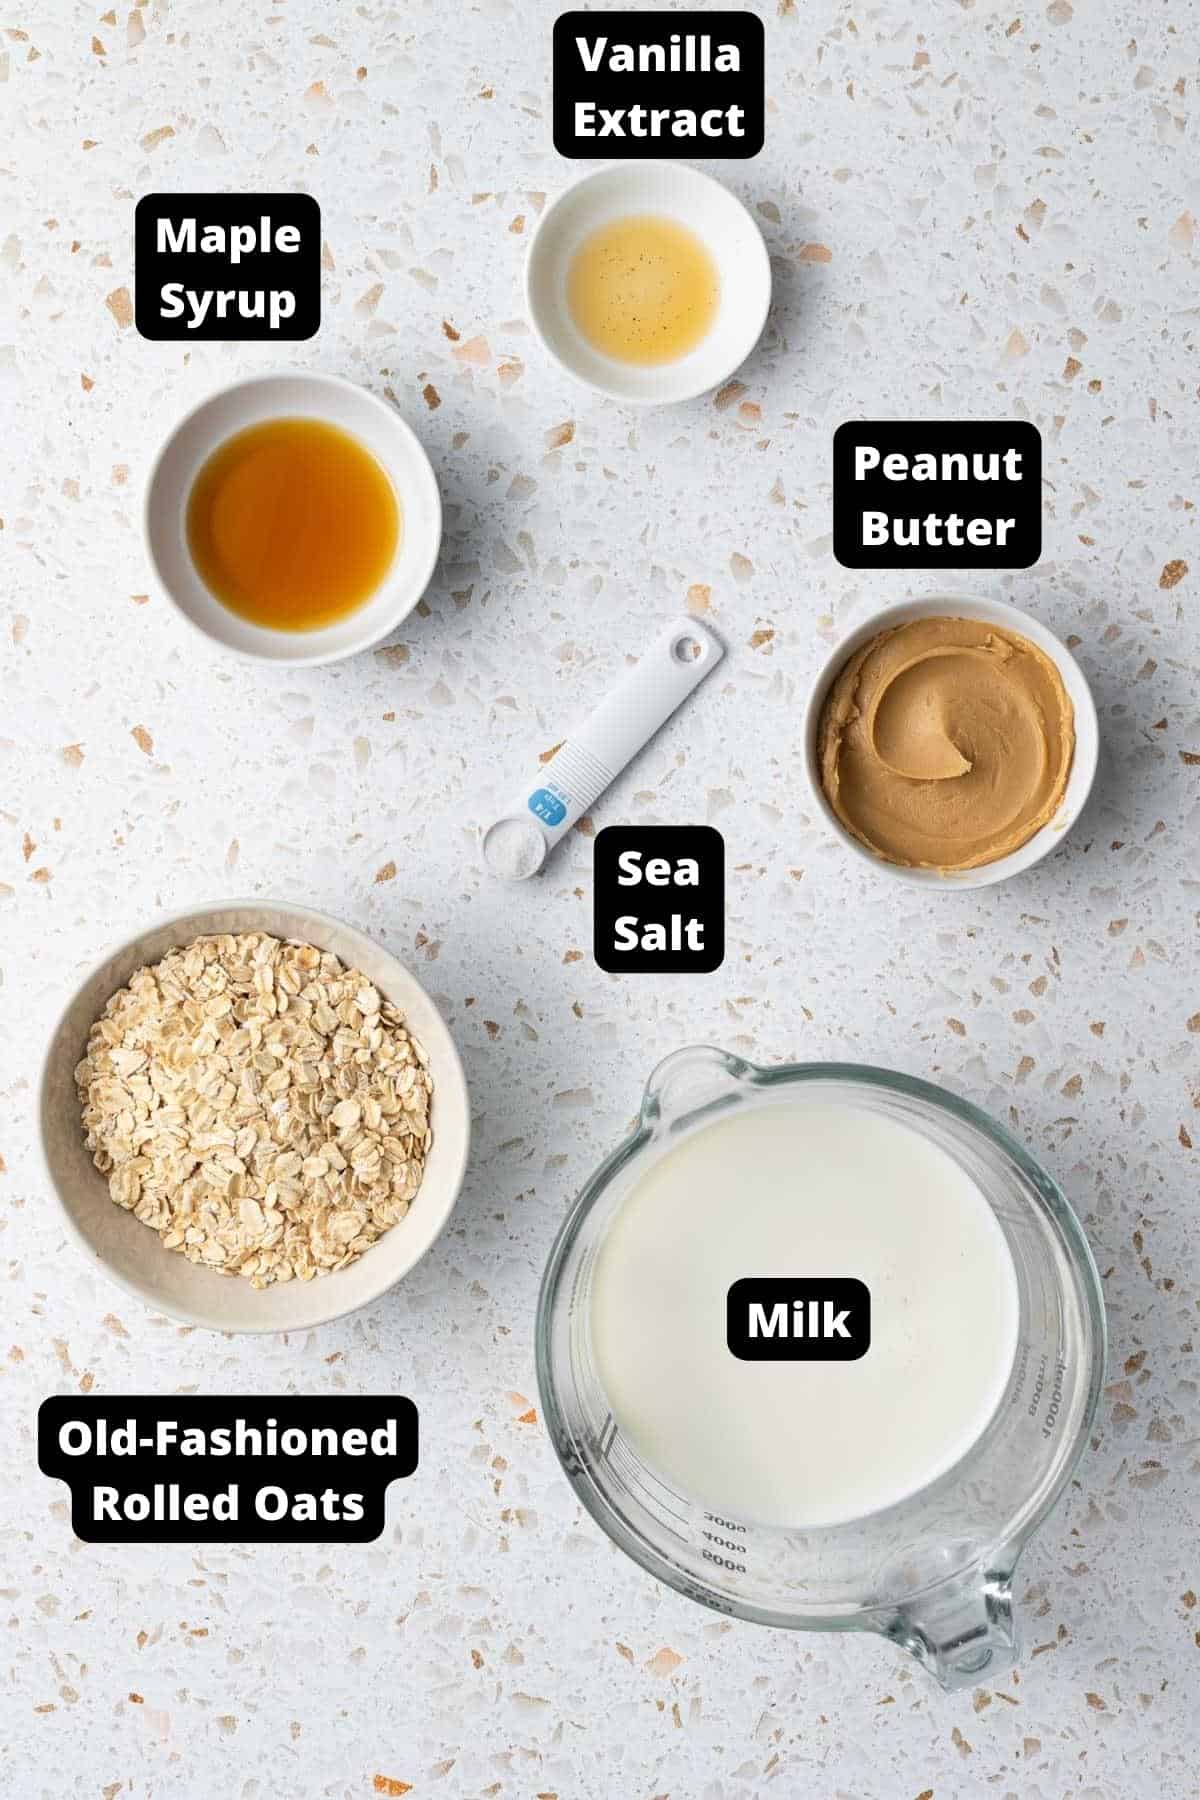 Ingredients in this recipe on a white speckled background.